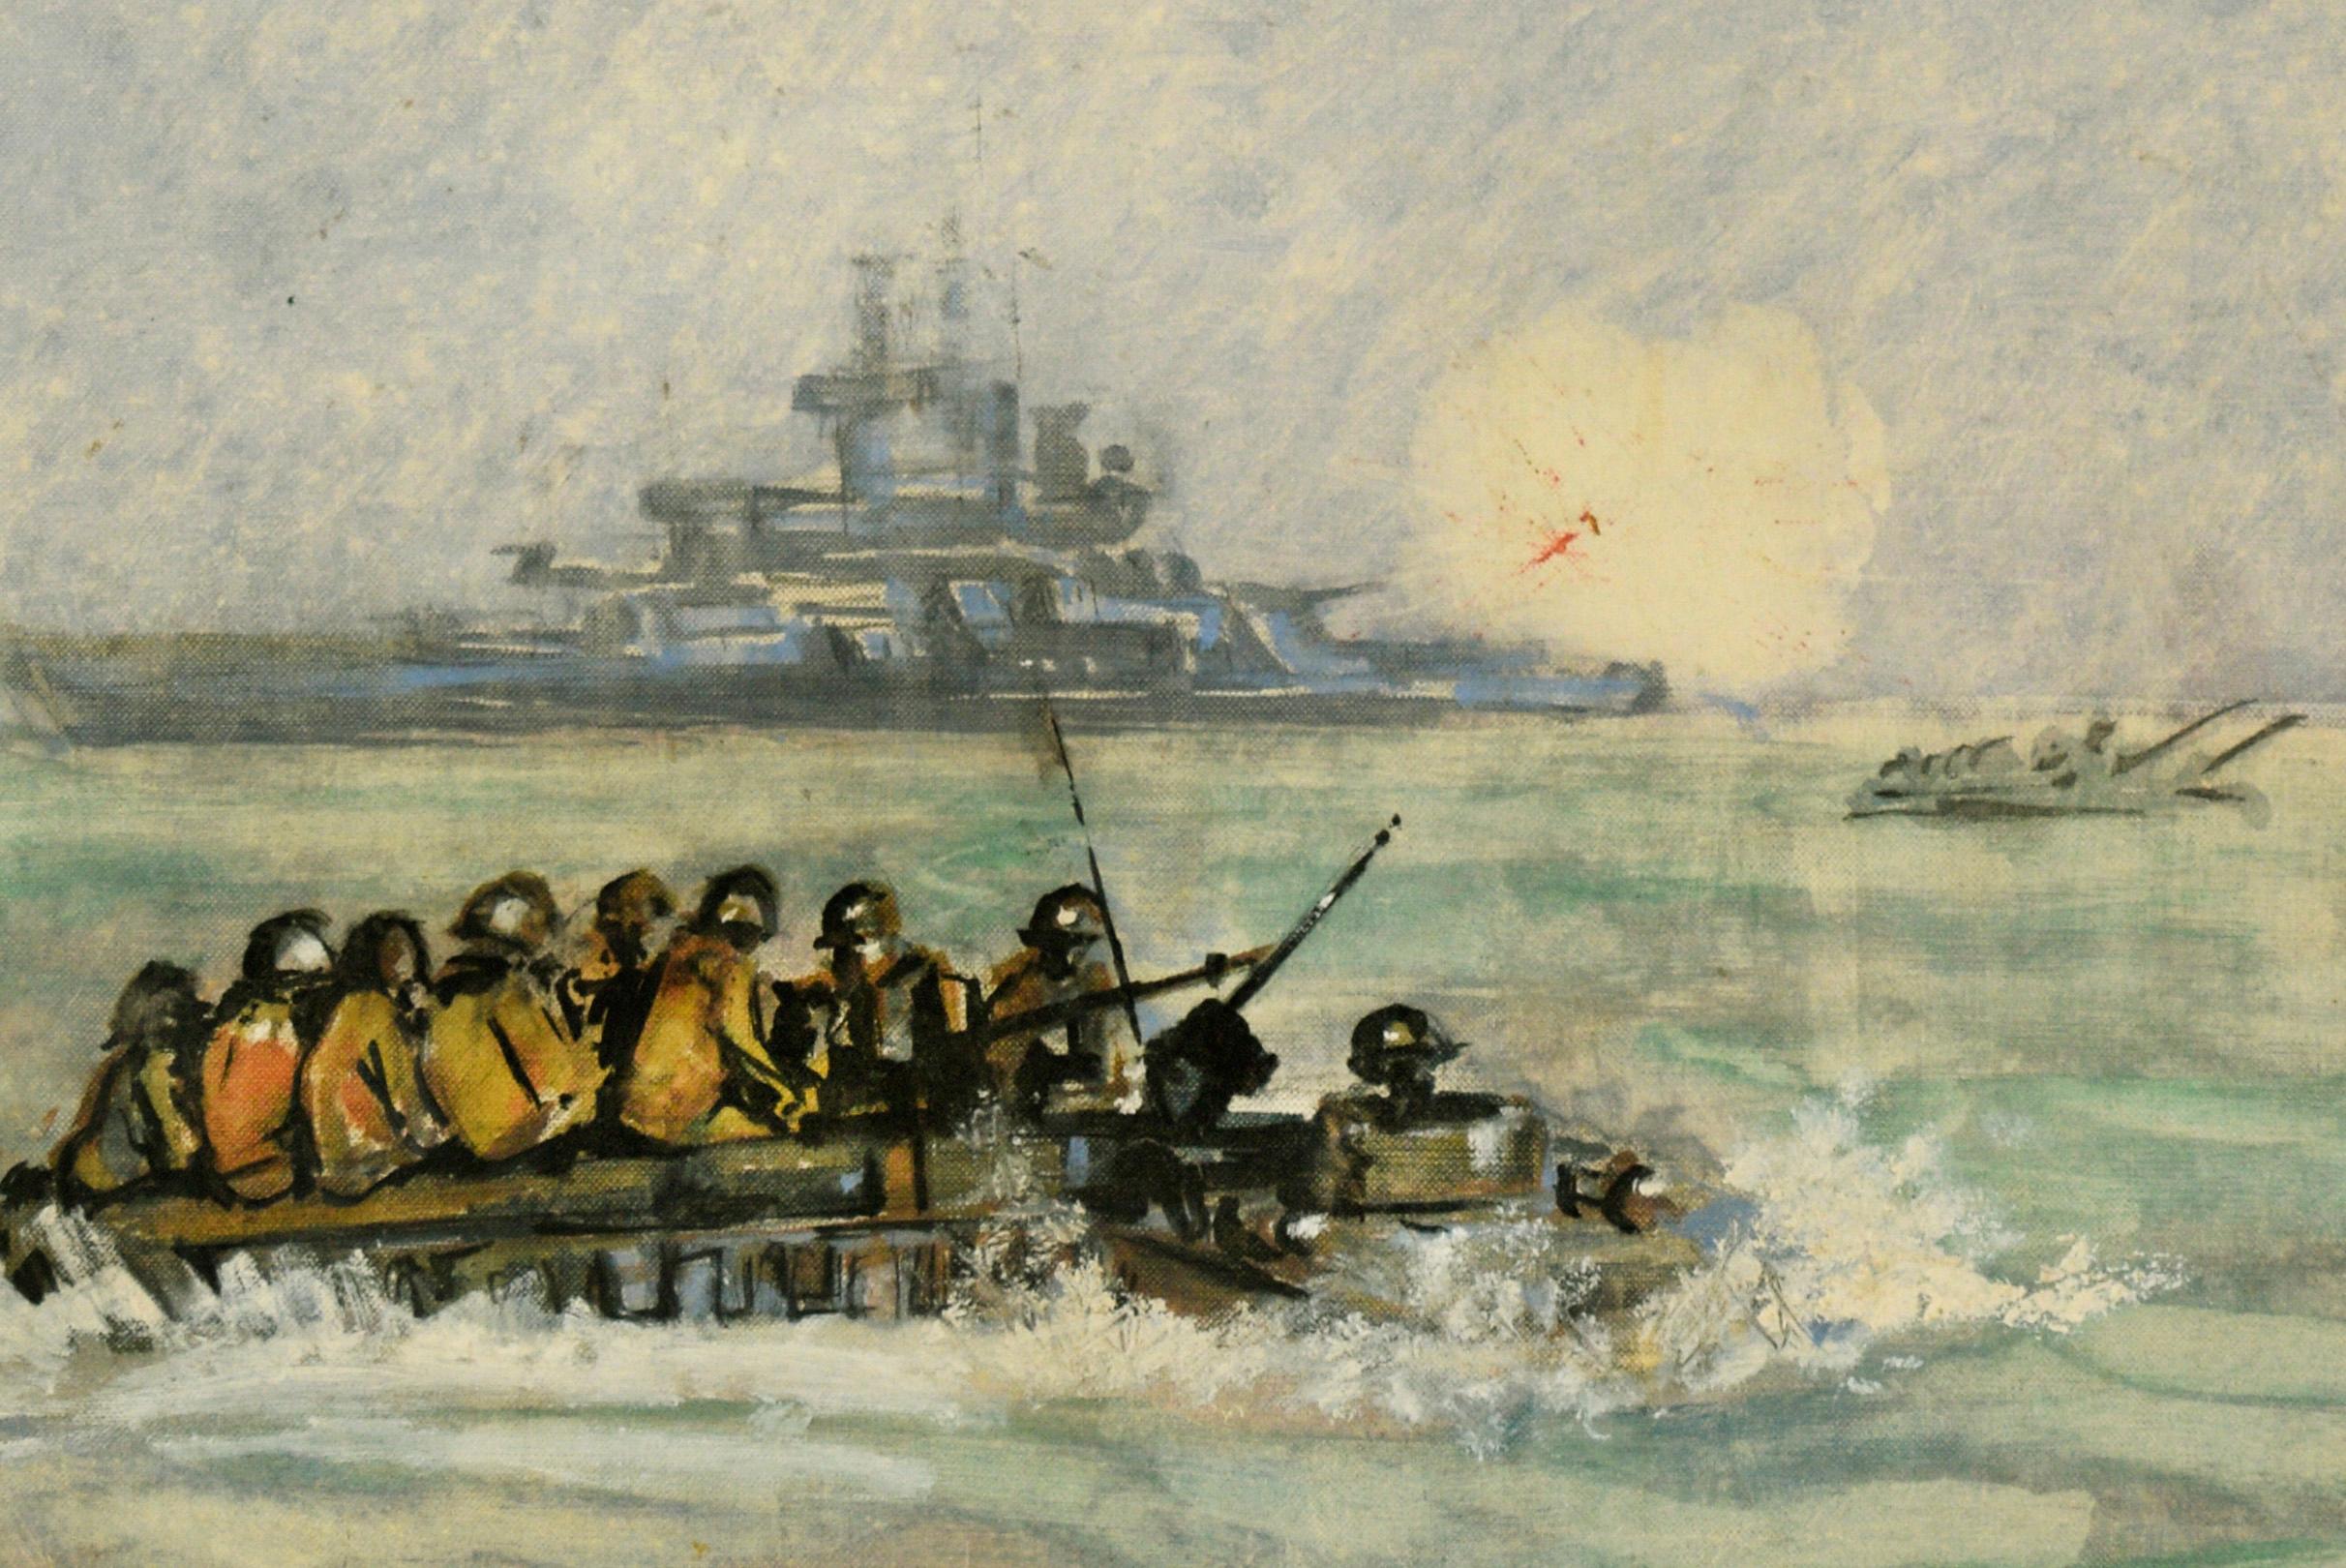 American Soldiers Landing Boats with Warships Firing in the Distance - Impressionist Painting by Linna Annetta Fogle Crow